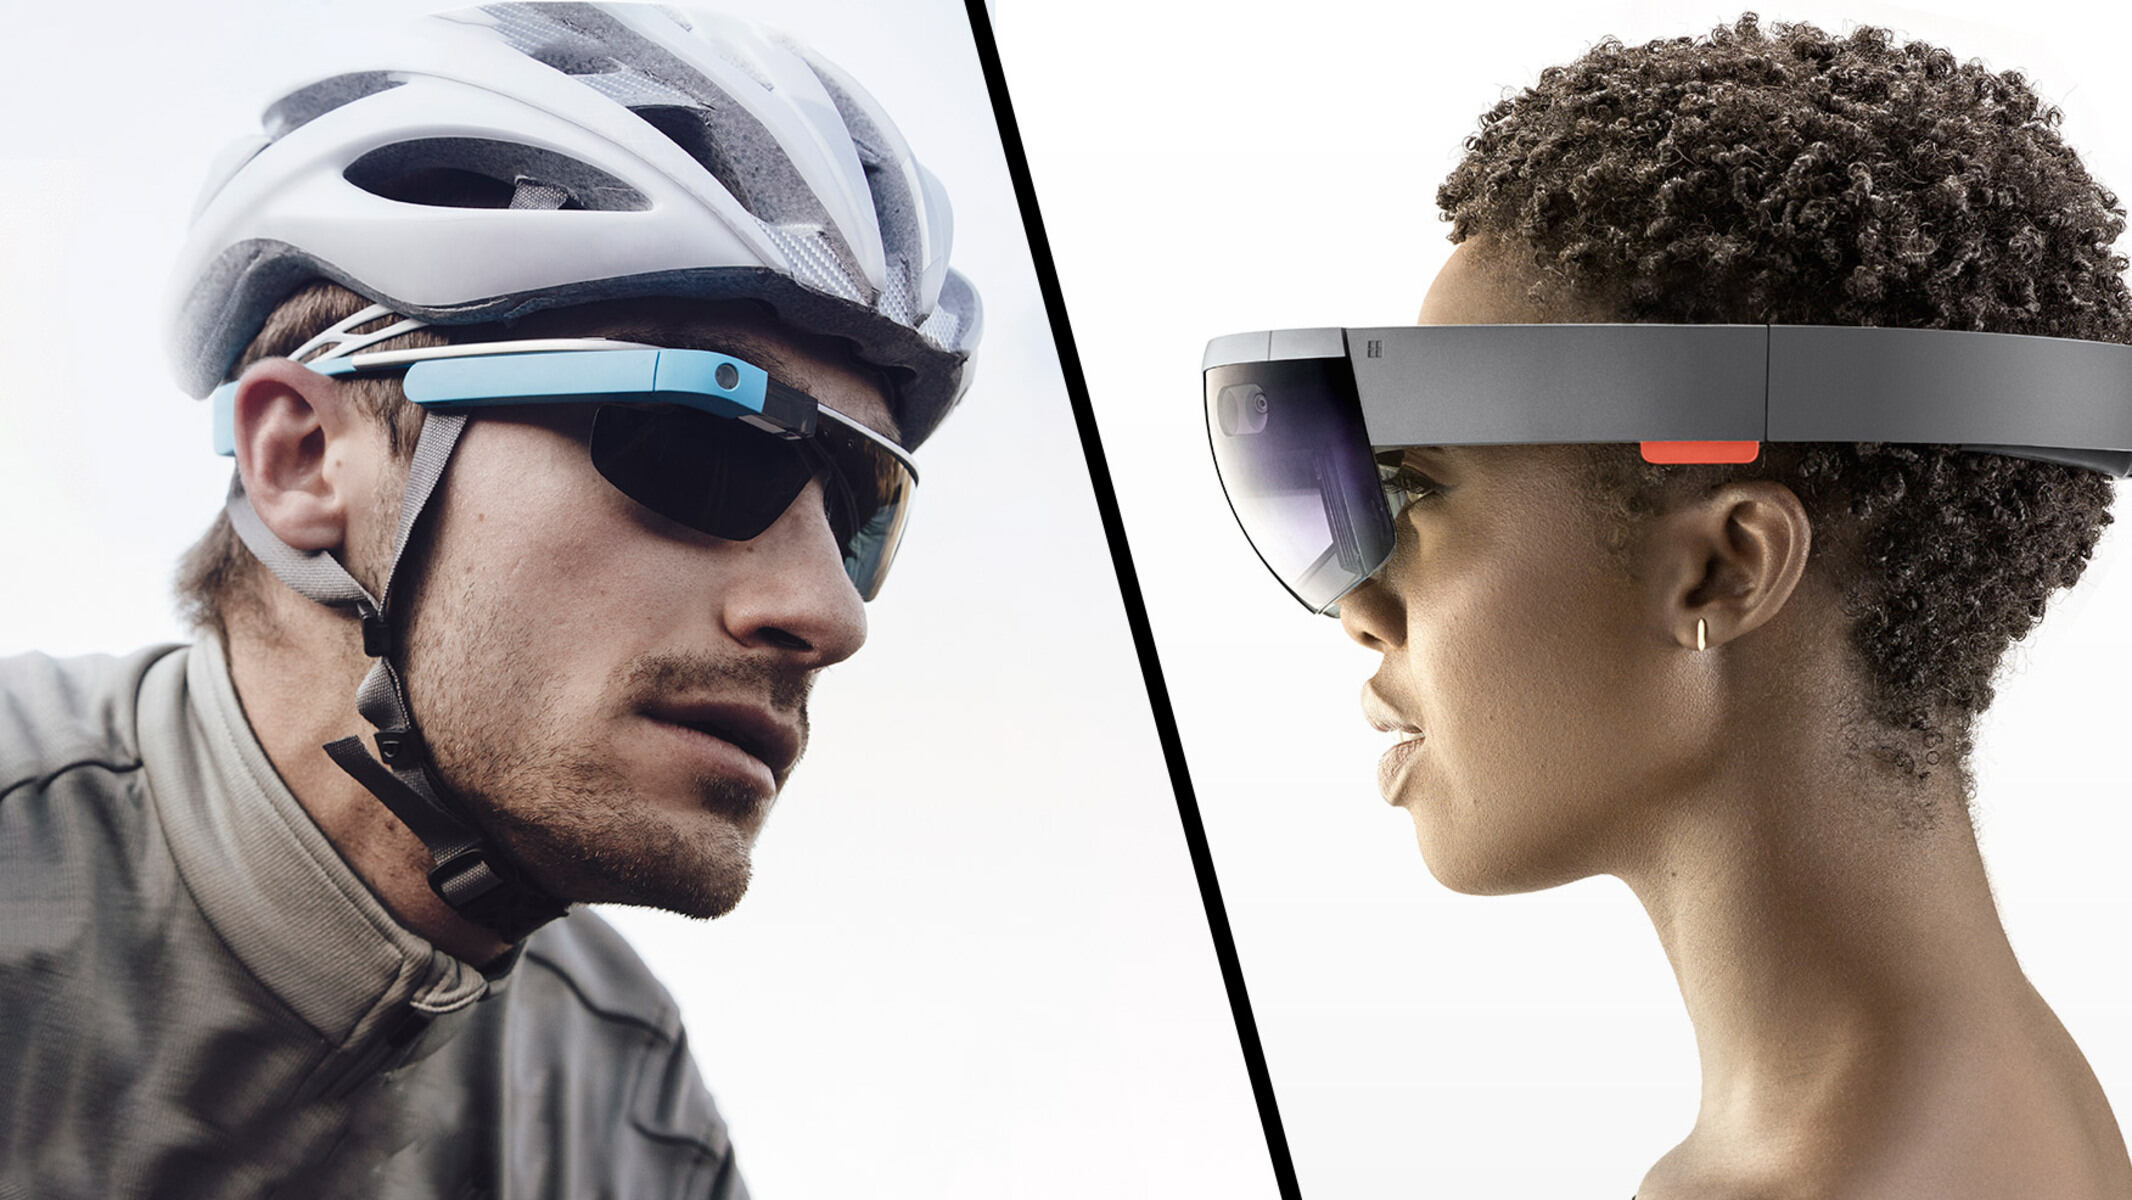 VR/AR Headsets Vs. Smart Glasses: What’s The Difference?